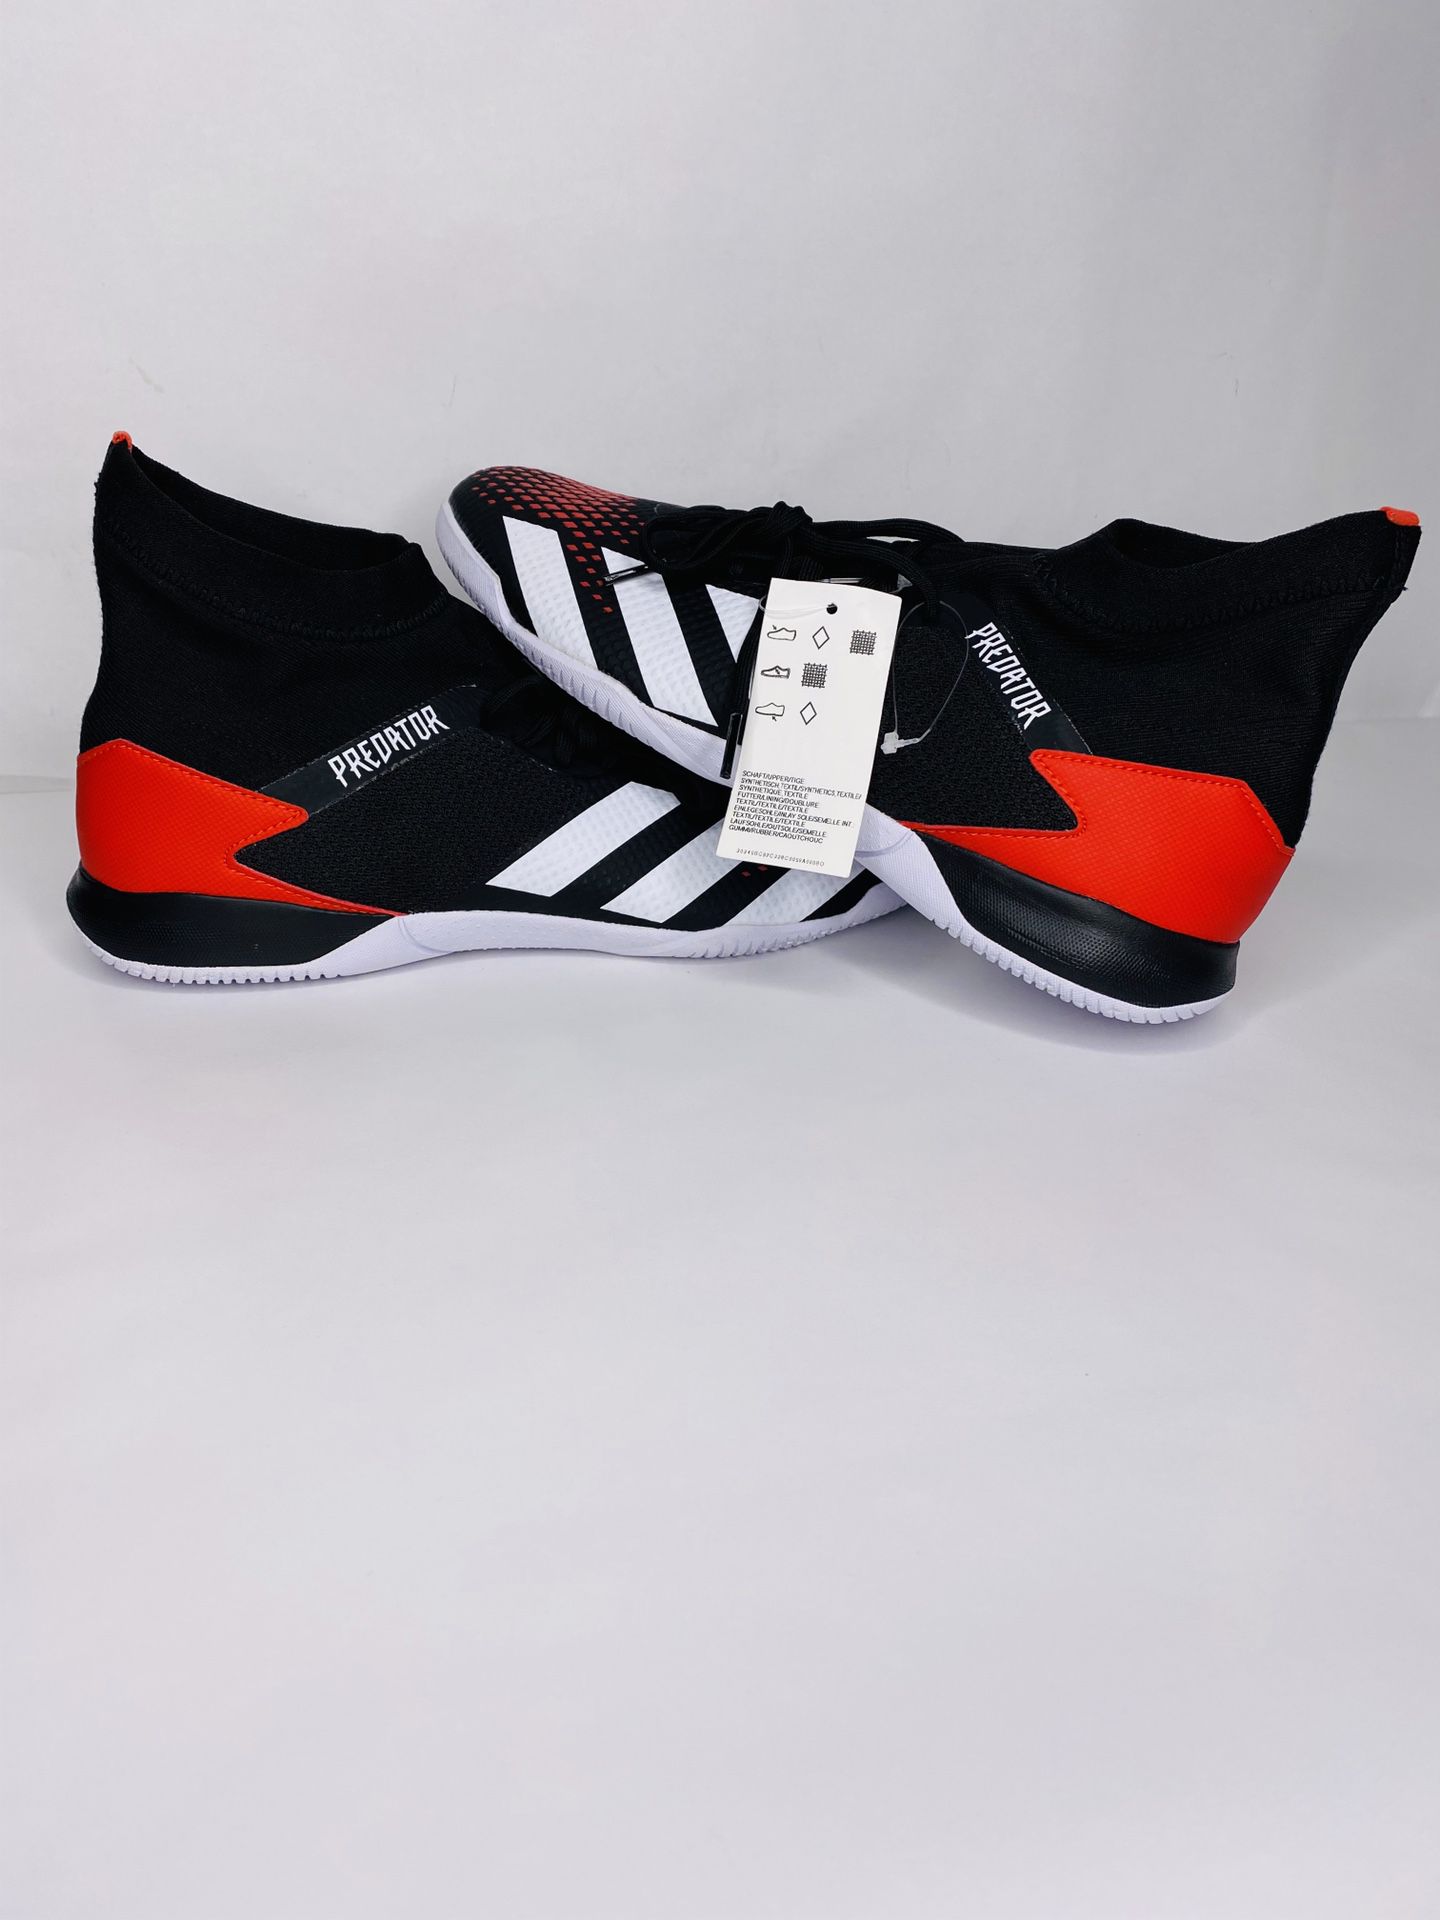 New Adidas Predator 20.3 IN Indoor Soccer Shoes Futsal Sz 10 Black-White-Red X. Shipped with USPS Priority Mail. Brand new without original box 100%